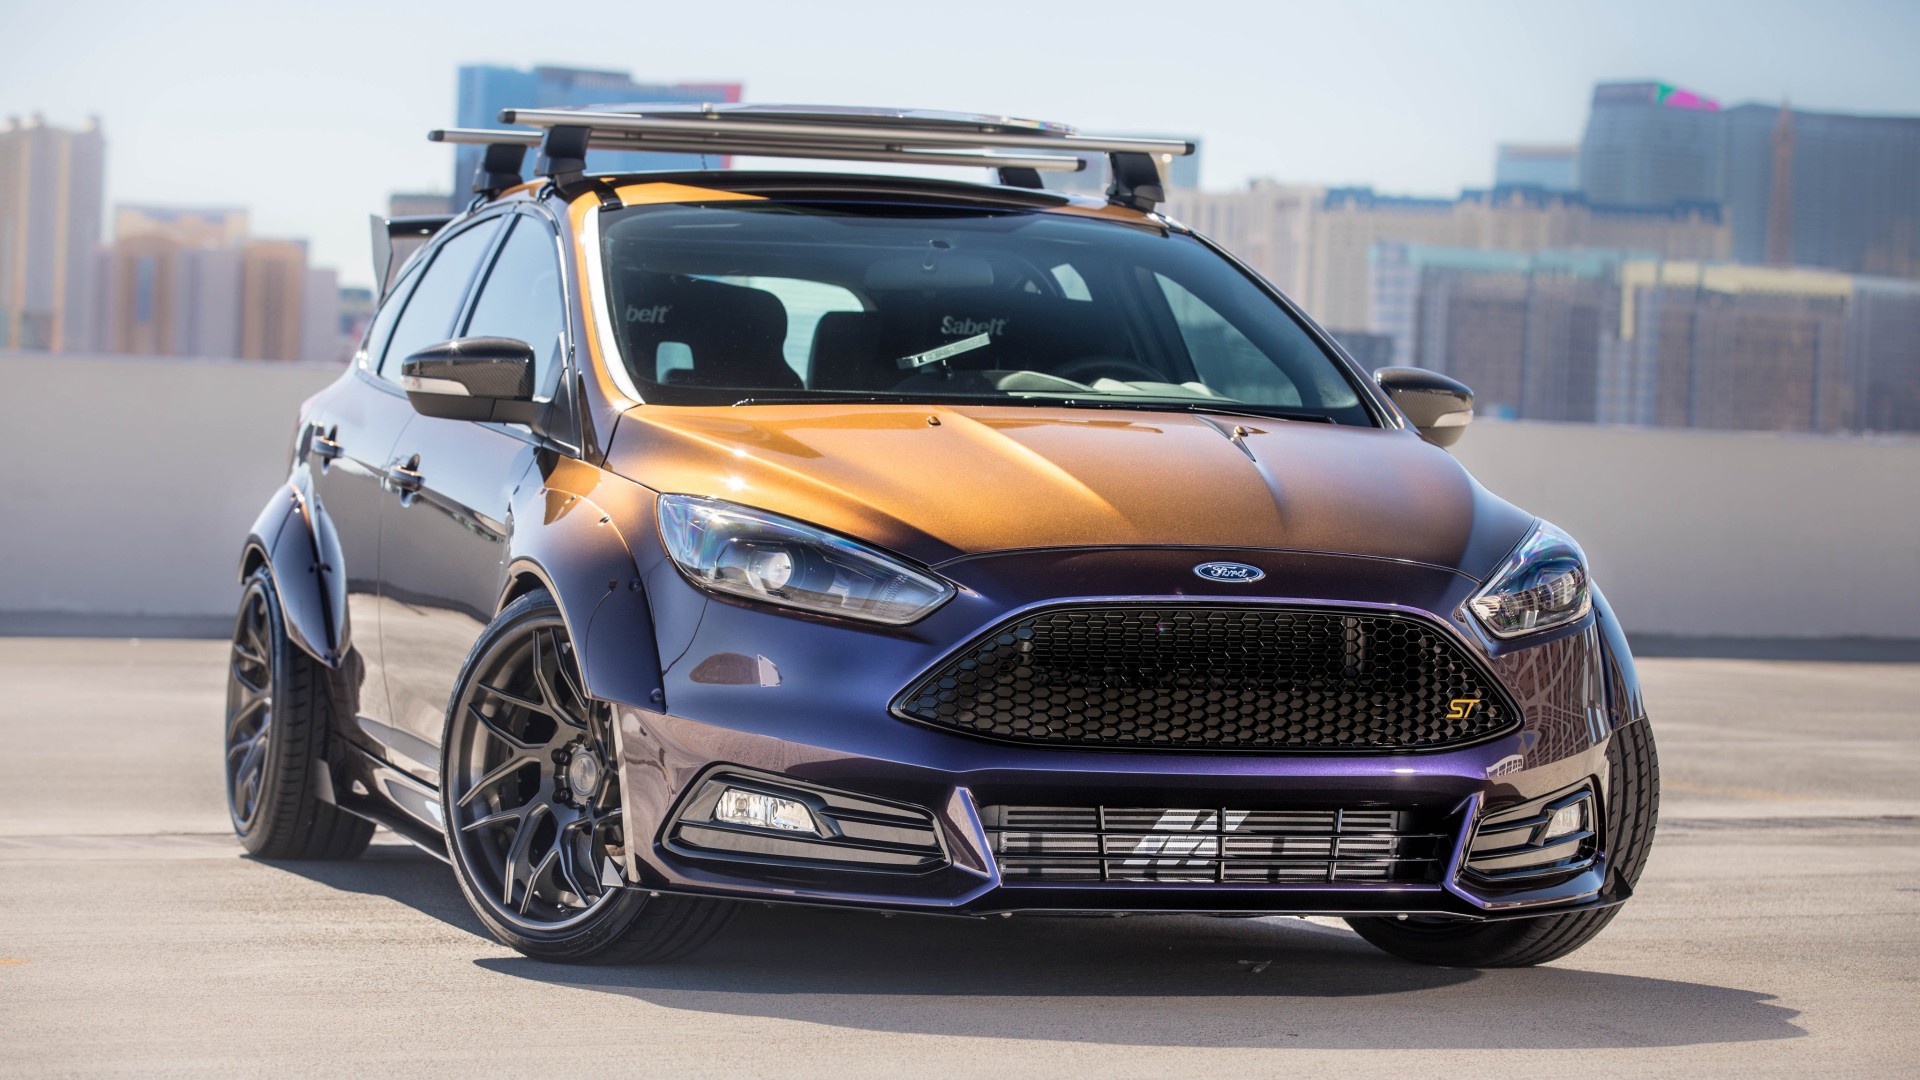 2017 Ford Focus ST by Blood Type Racing 4K Wallpaper | HD Car